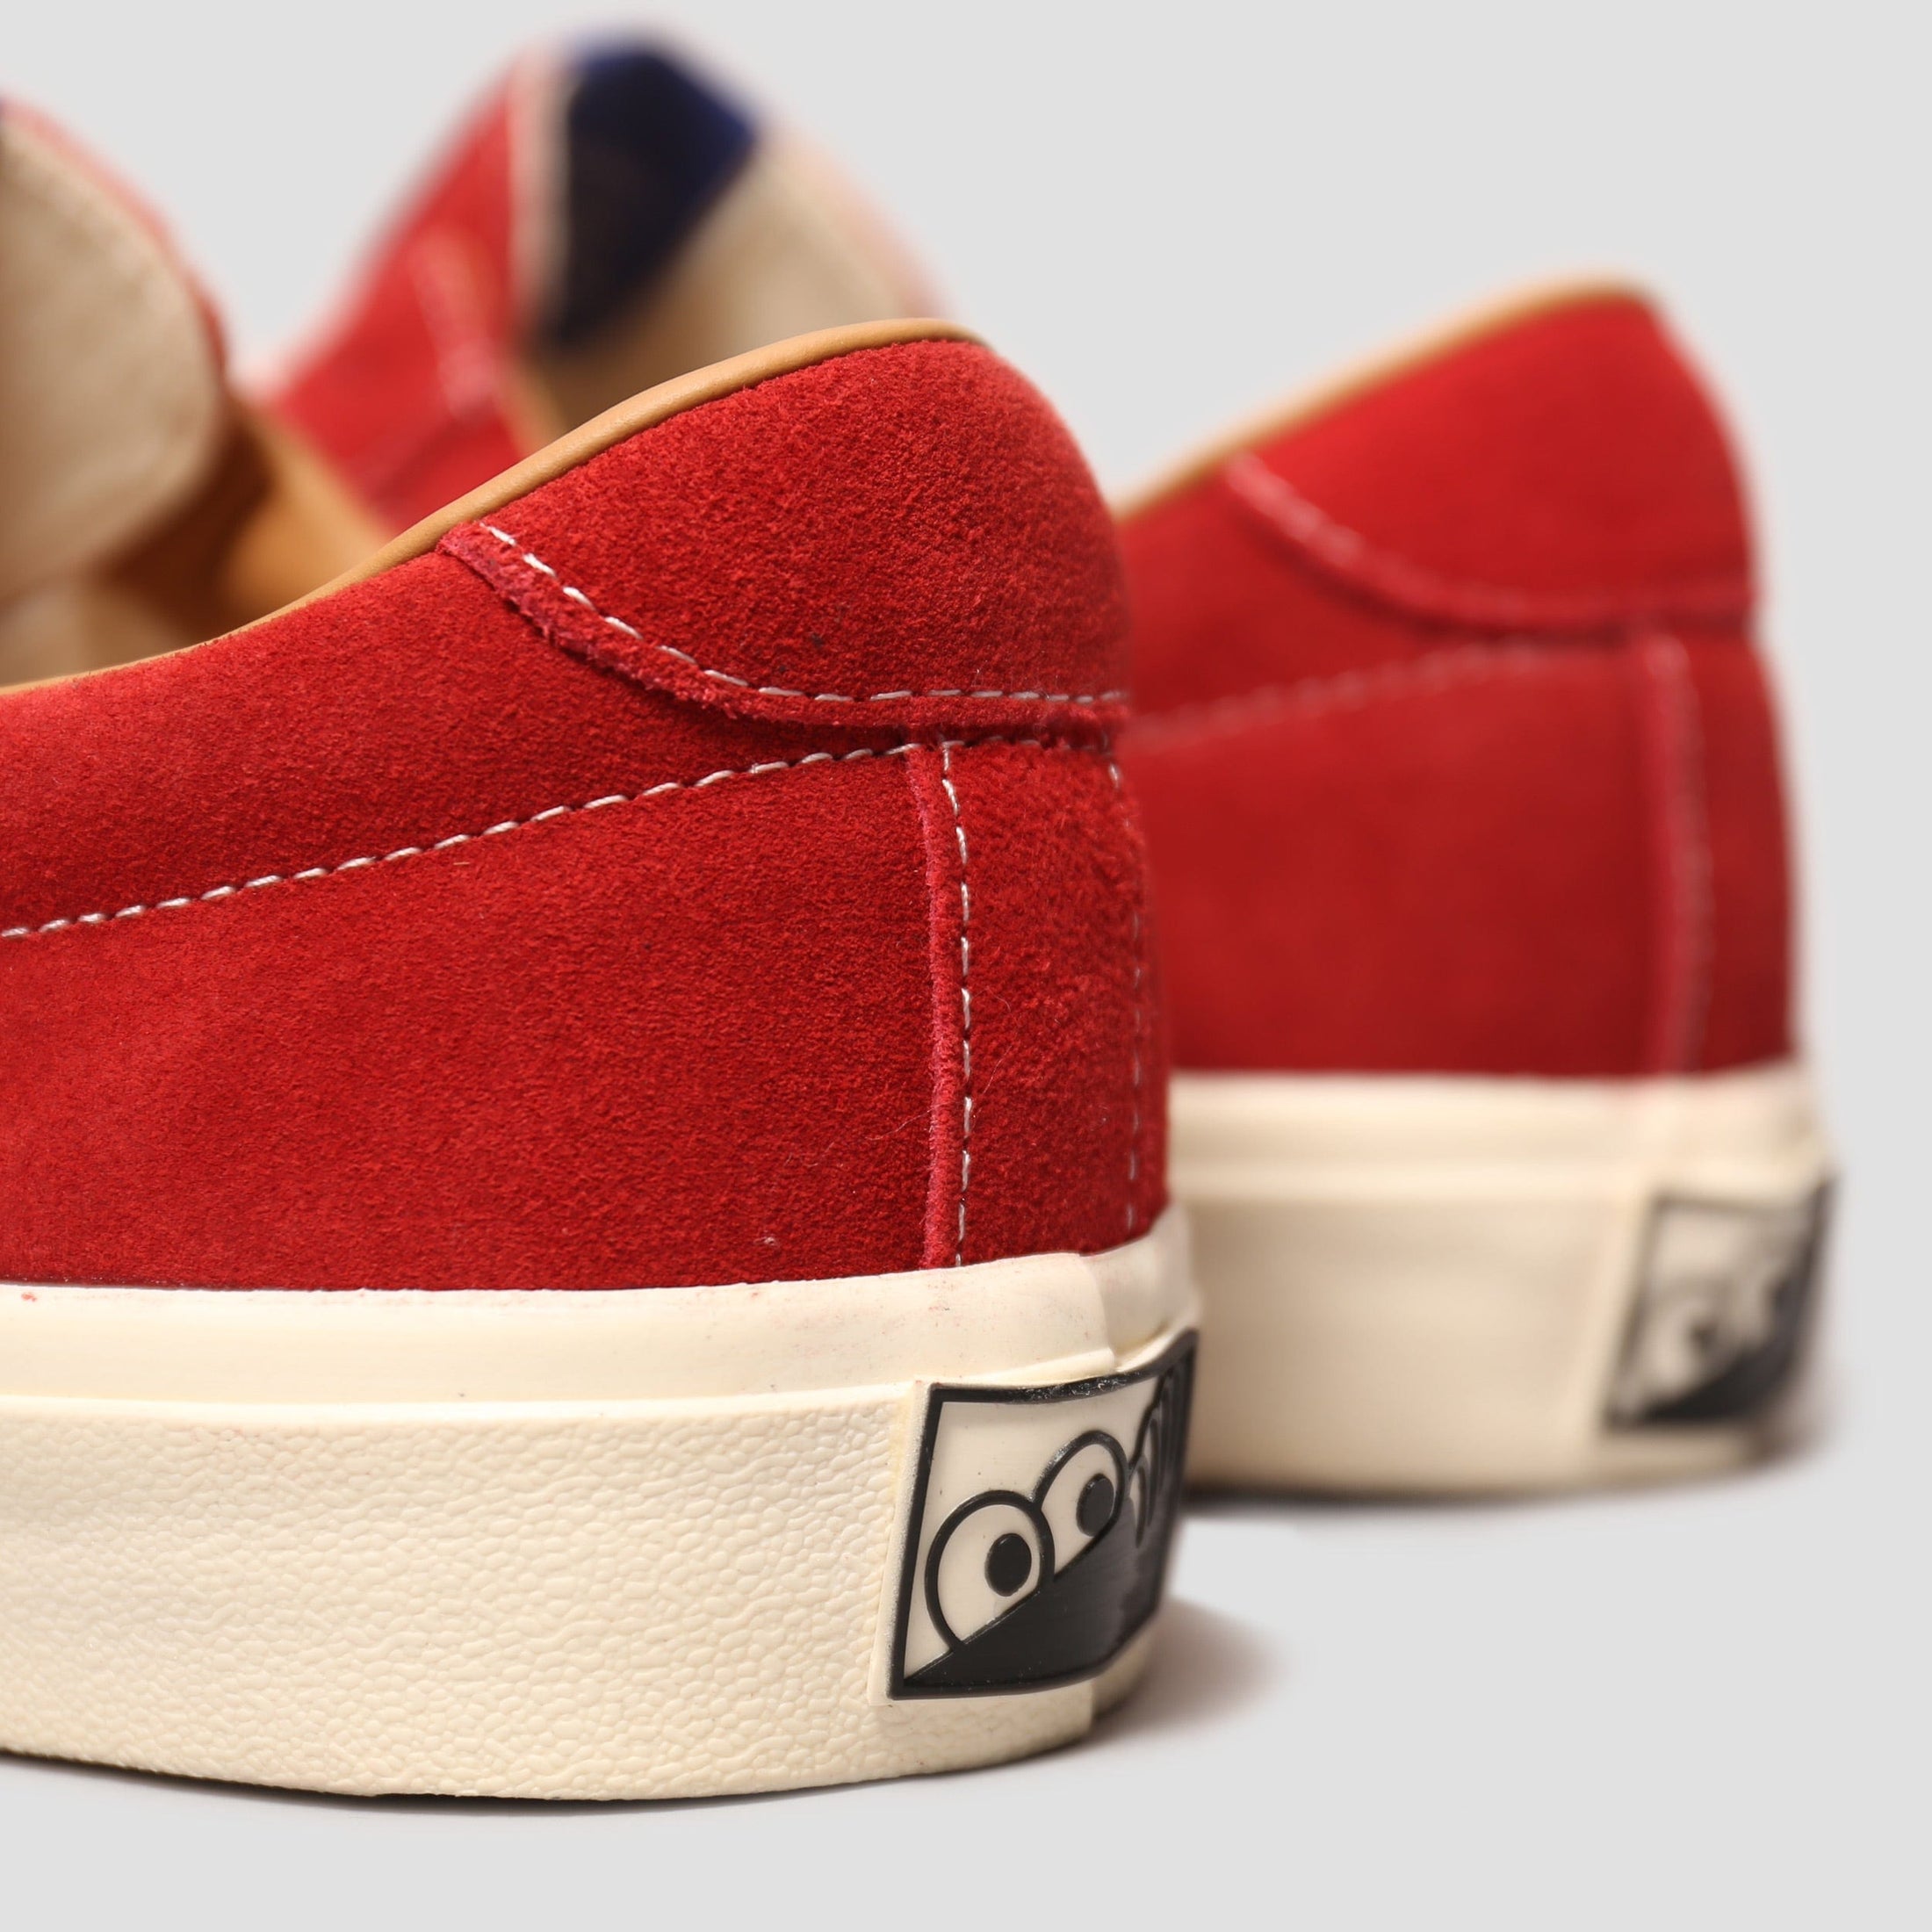 Last Resort VM001 Suede Lo Shoes Old Red / White